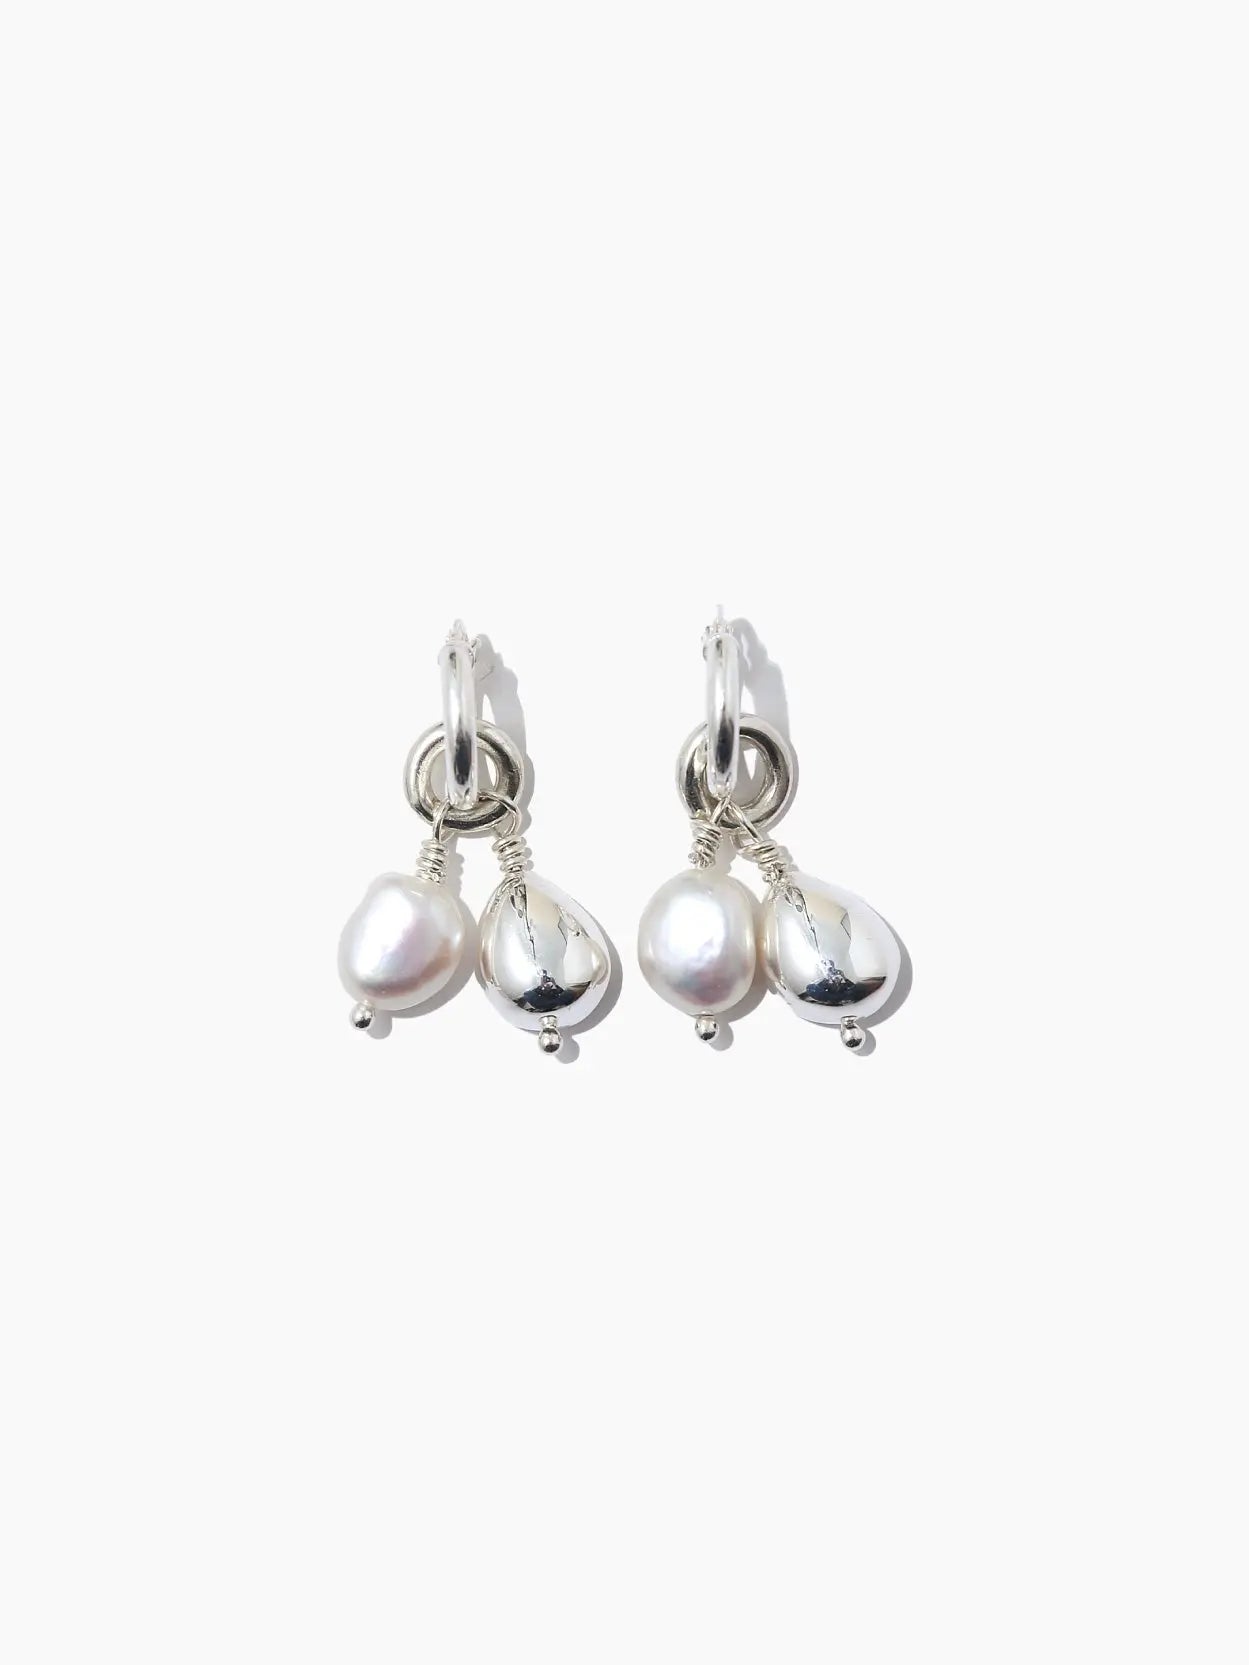 A pair of Perla Hoops by Nathalie Schreckenberg with hanging irregularly shaped white pearls. The pearls are attached to the hoops by small silver loops, creating a delicate and elegant design. Set against a plain white background, these earrings available at Bassalstore in Barcelona highlight simplicity and beauty.